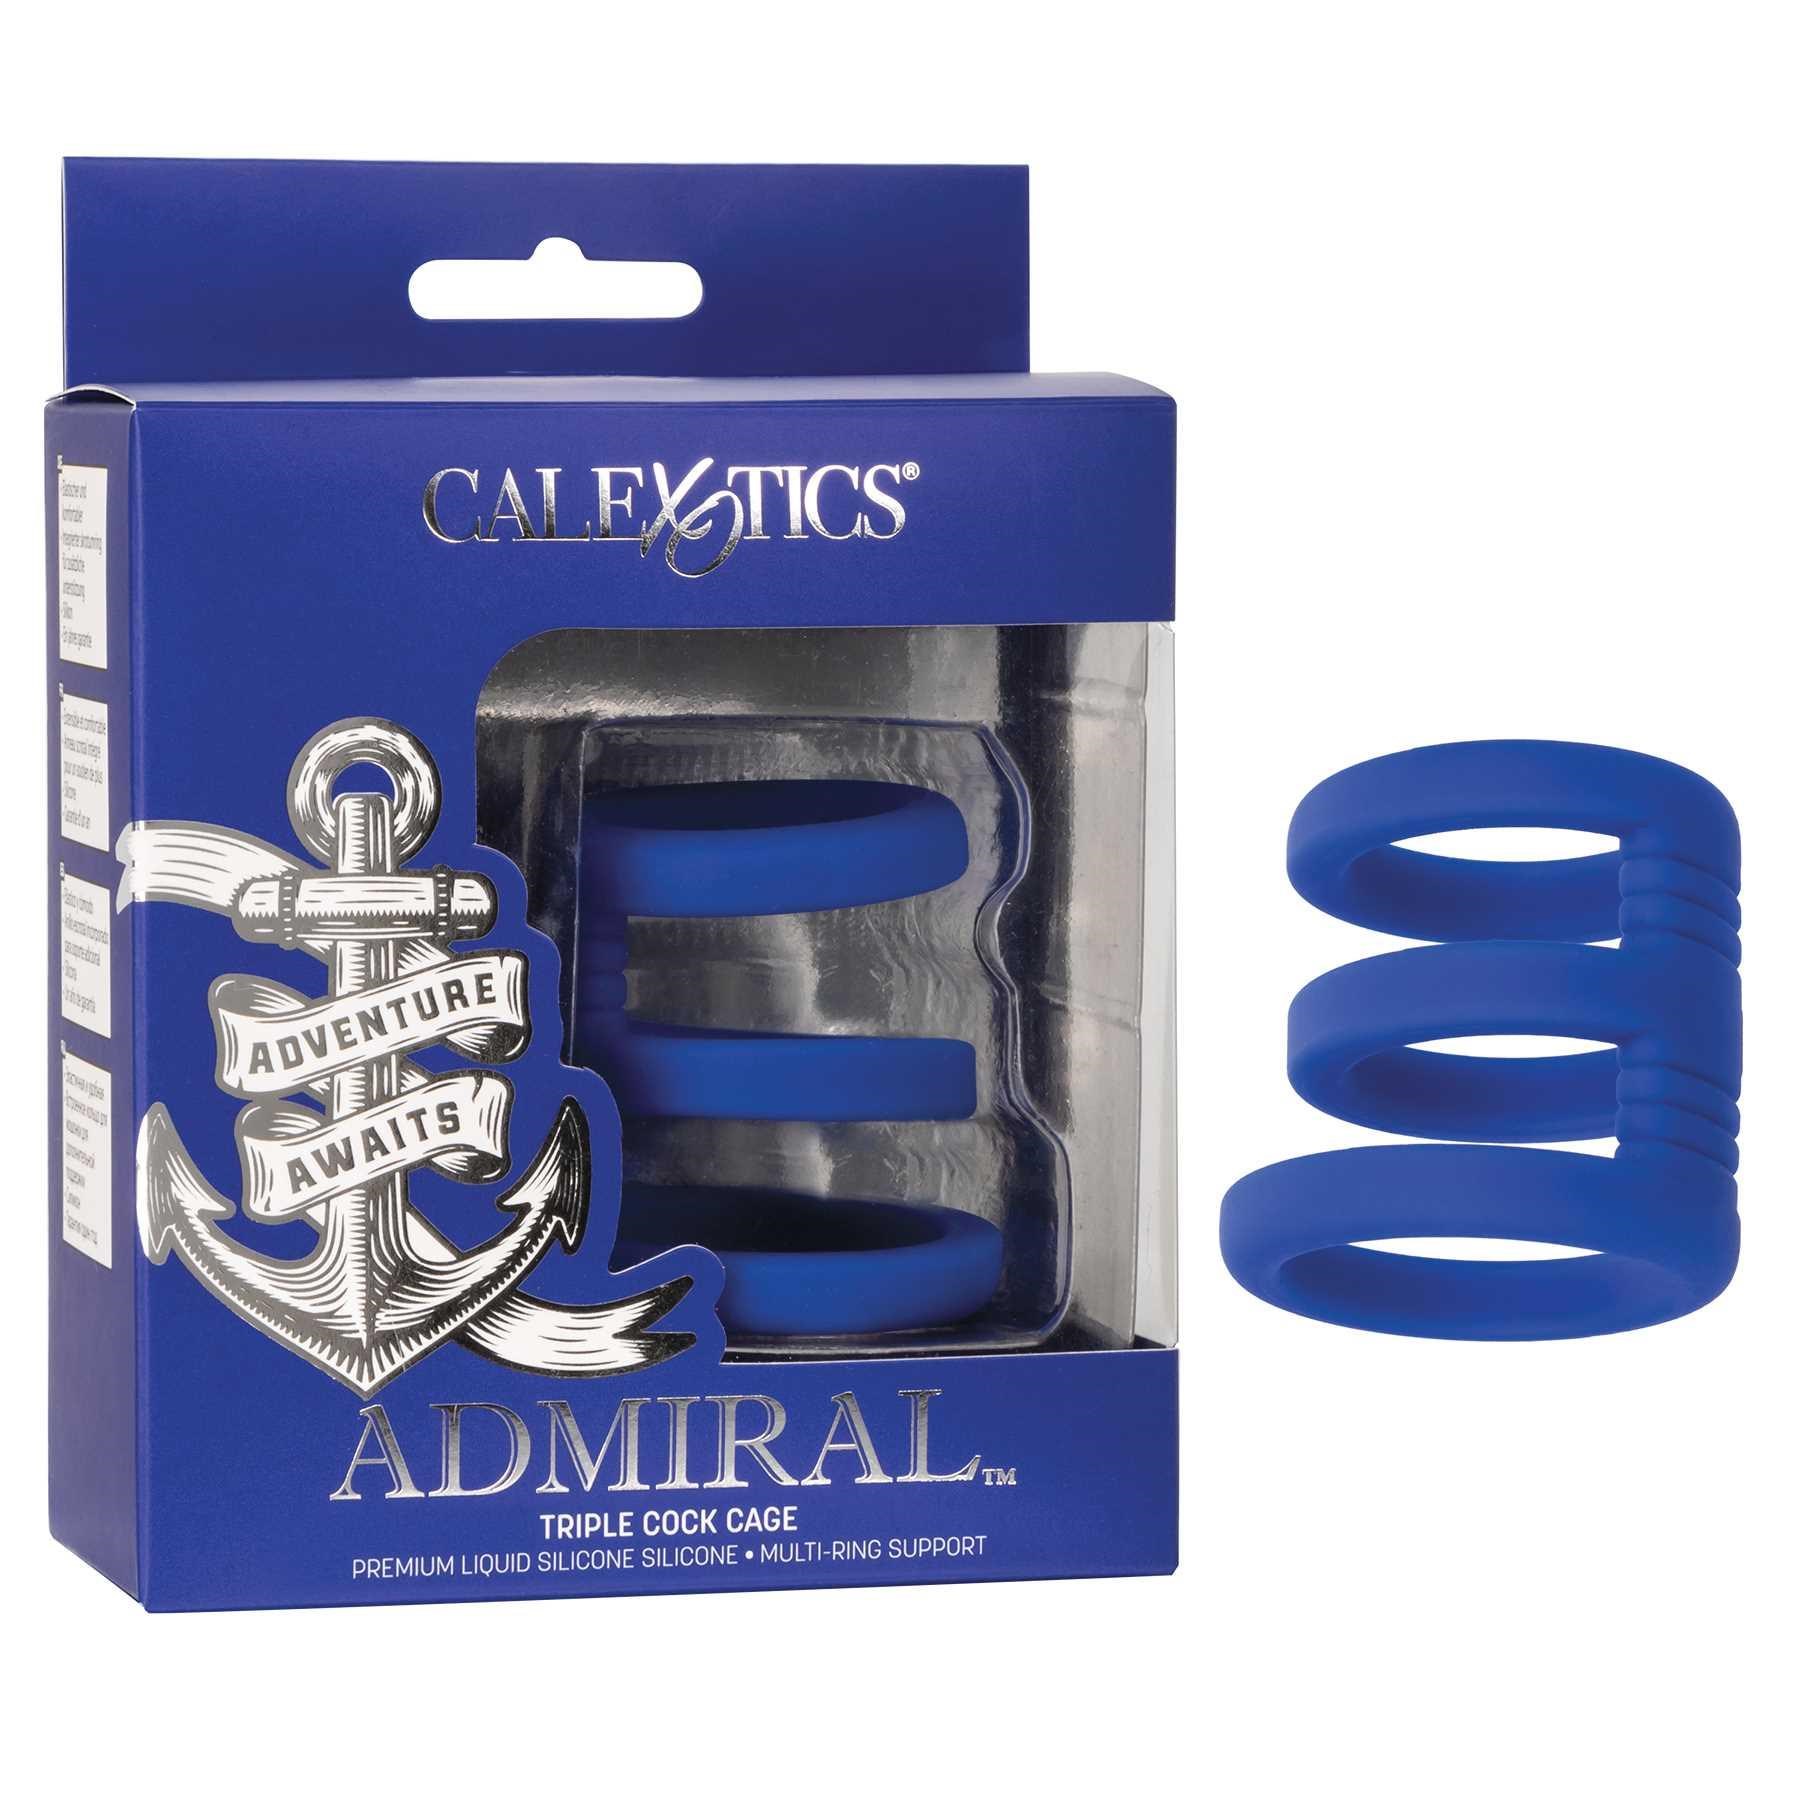 Admiral Triple Cock Cage with box packaging